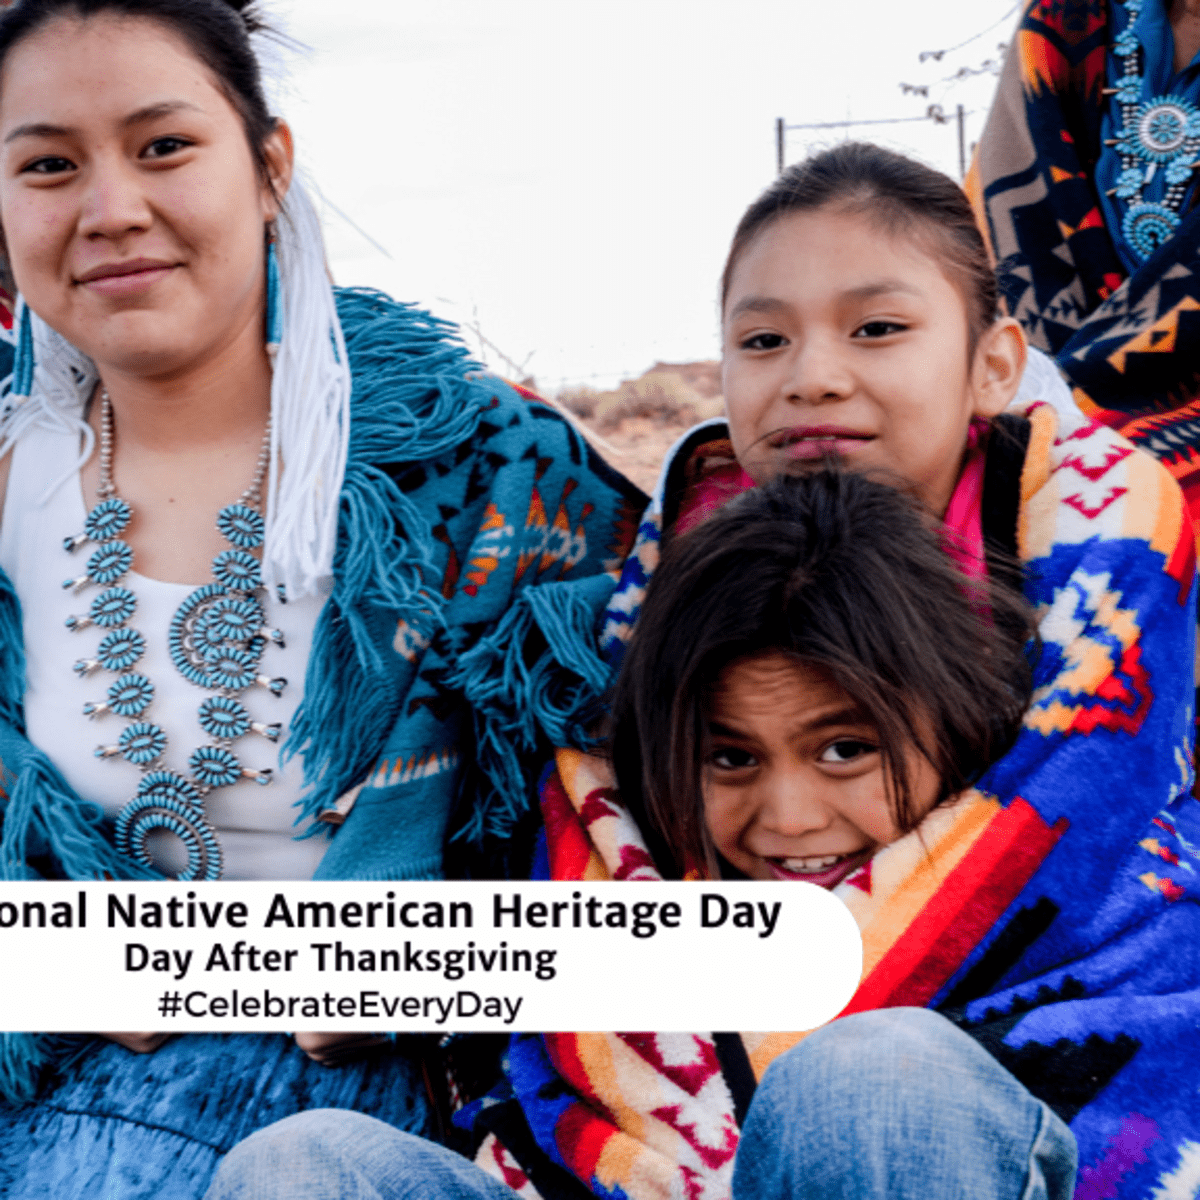 NATIONAL NATIVE AMERICAN HERITAGE DAY